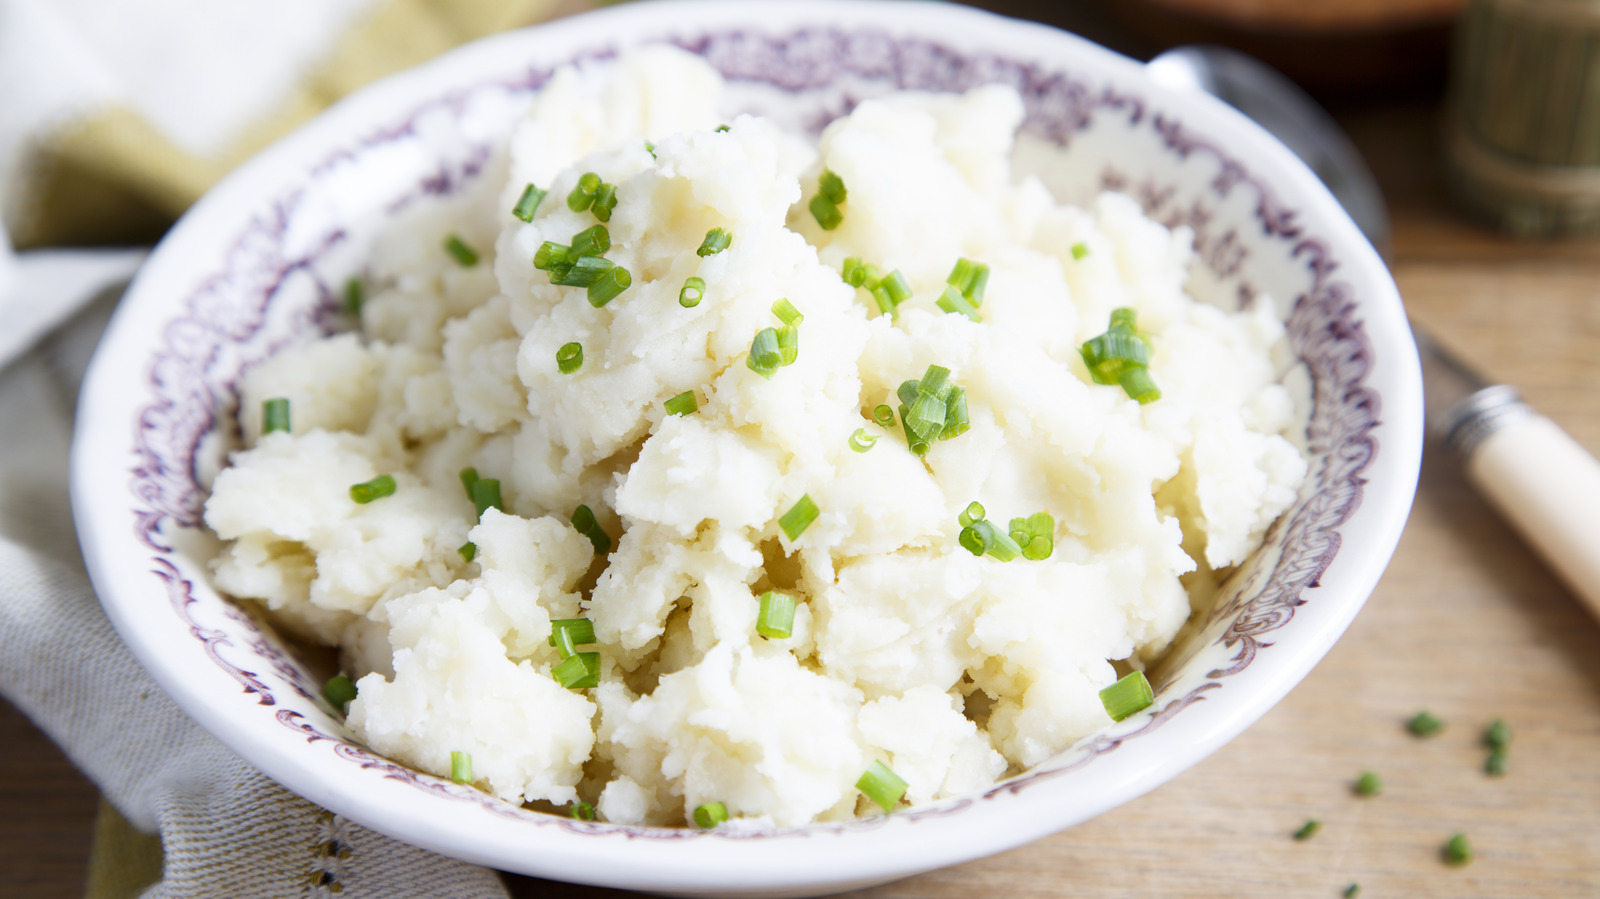 Celery Root Is The Key To Sweet, Buttery Mashed Potatoes